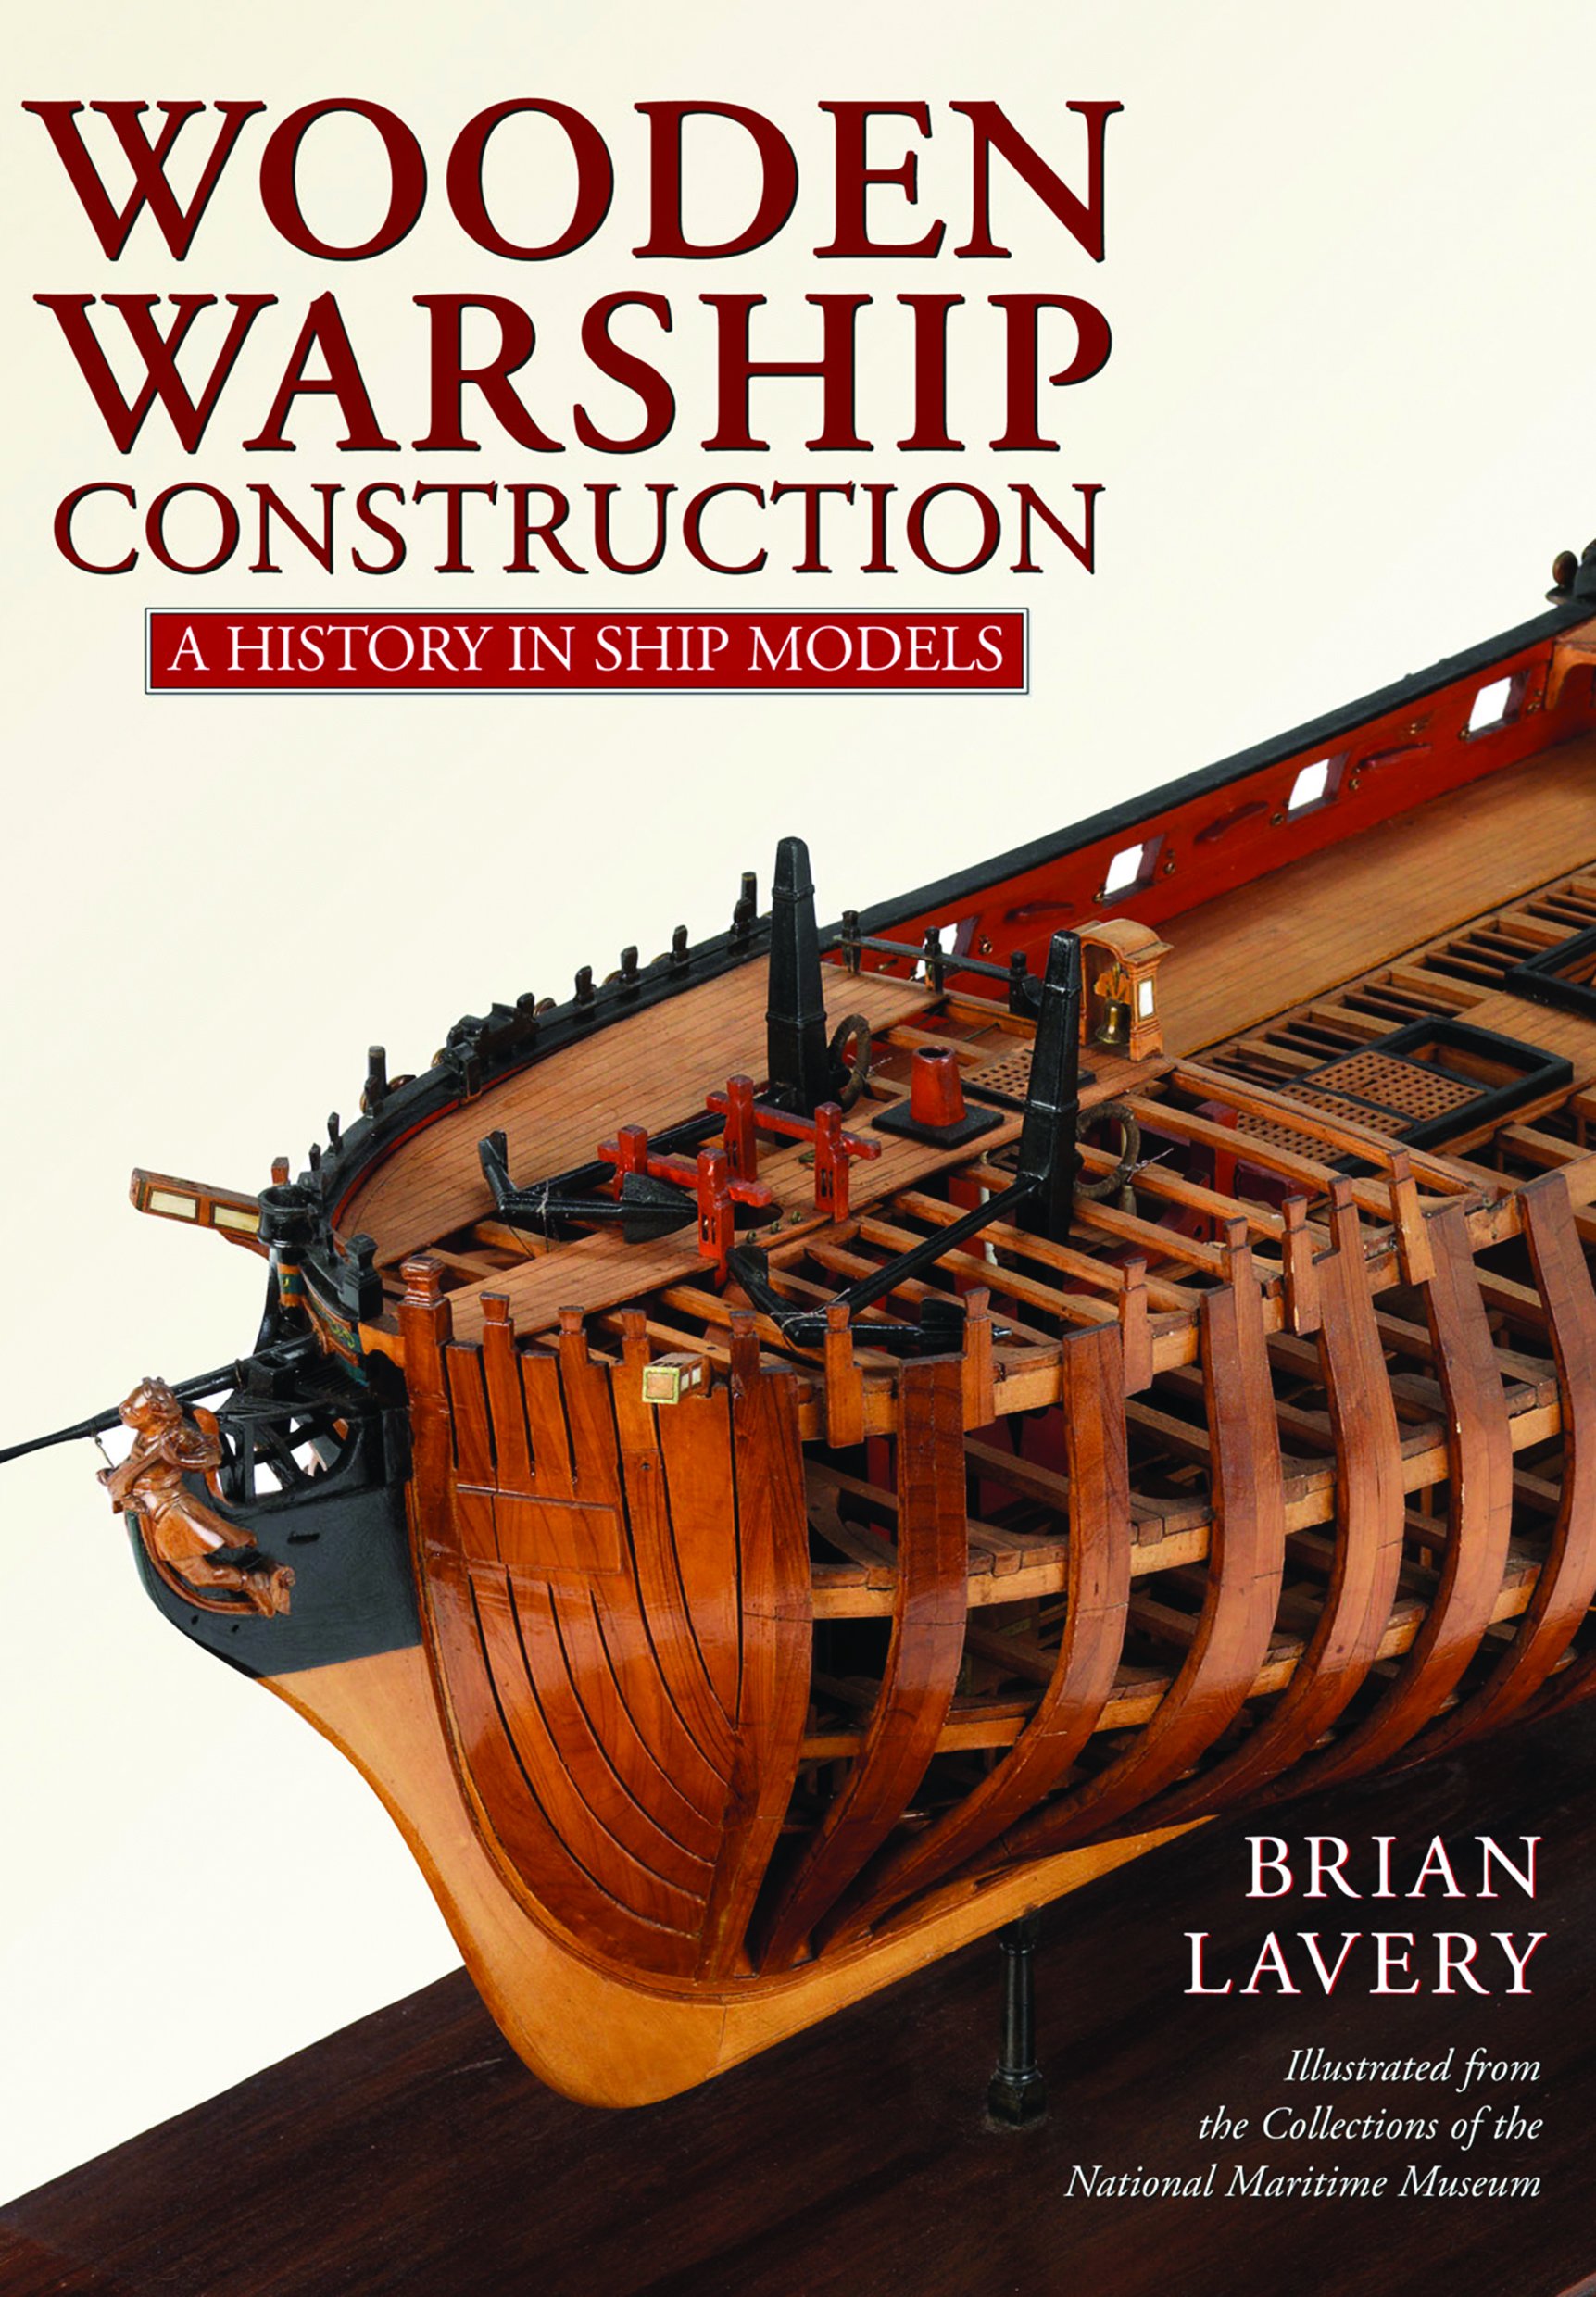 Wooden warship construction